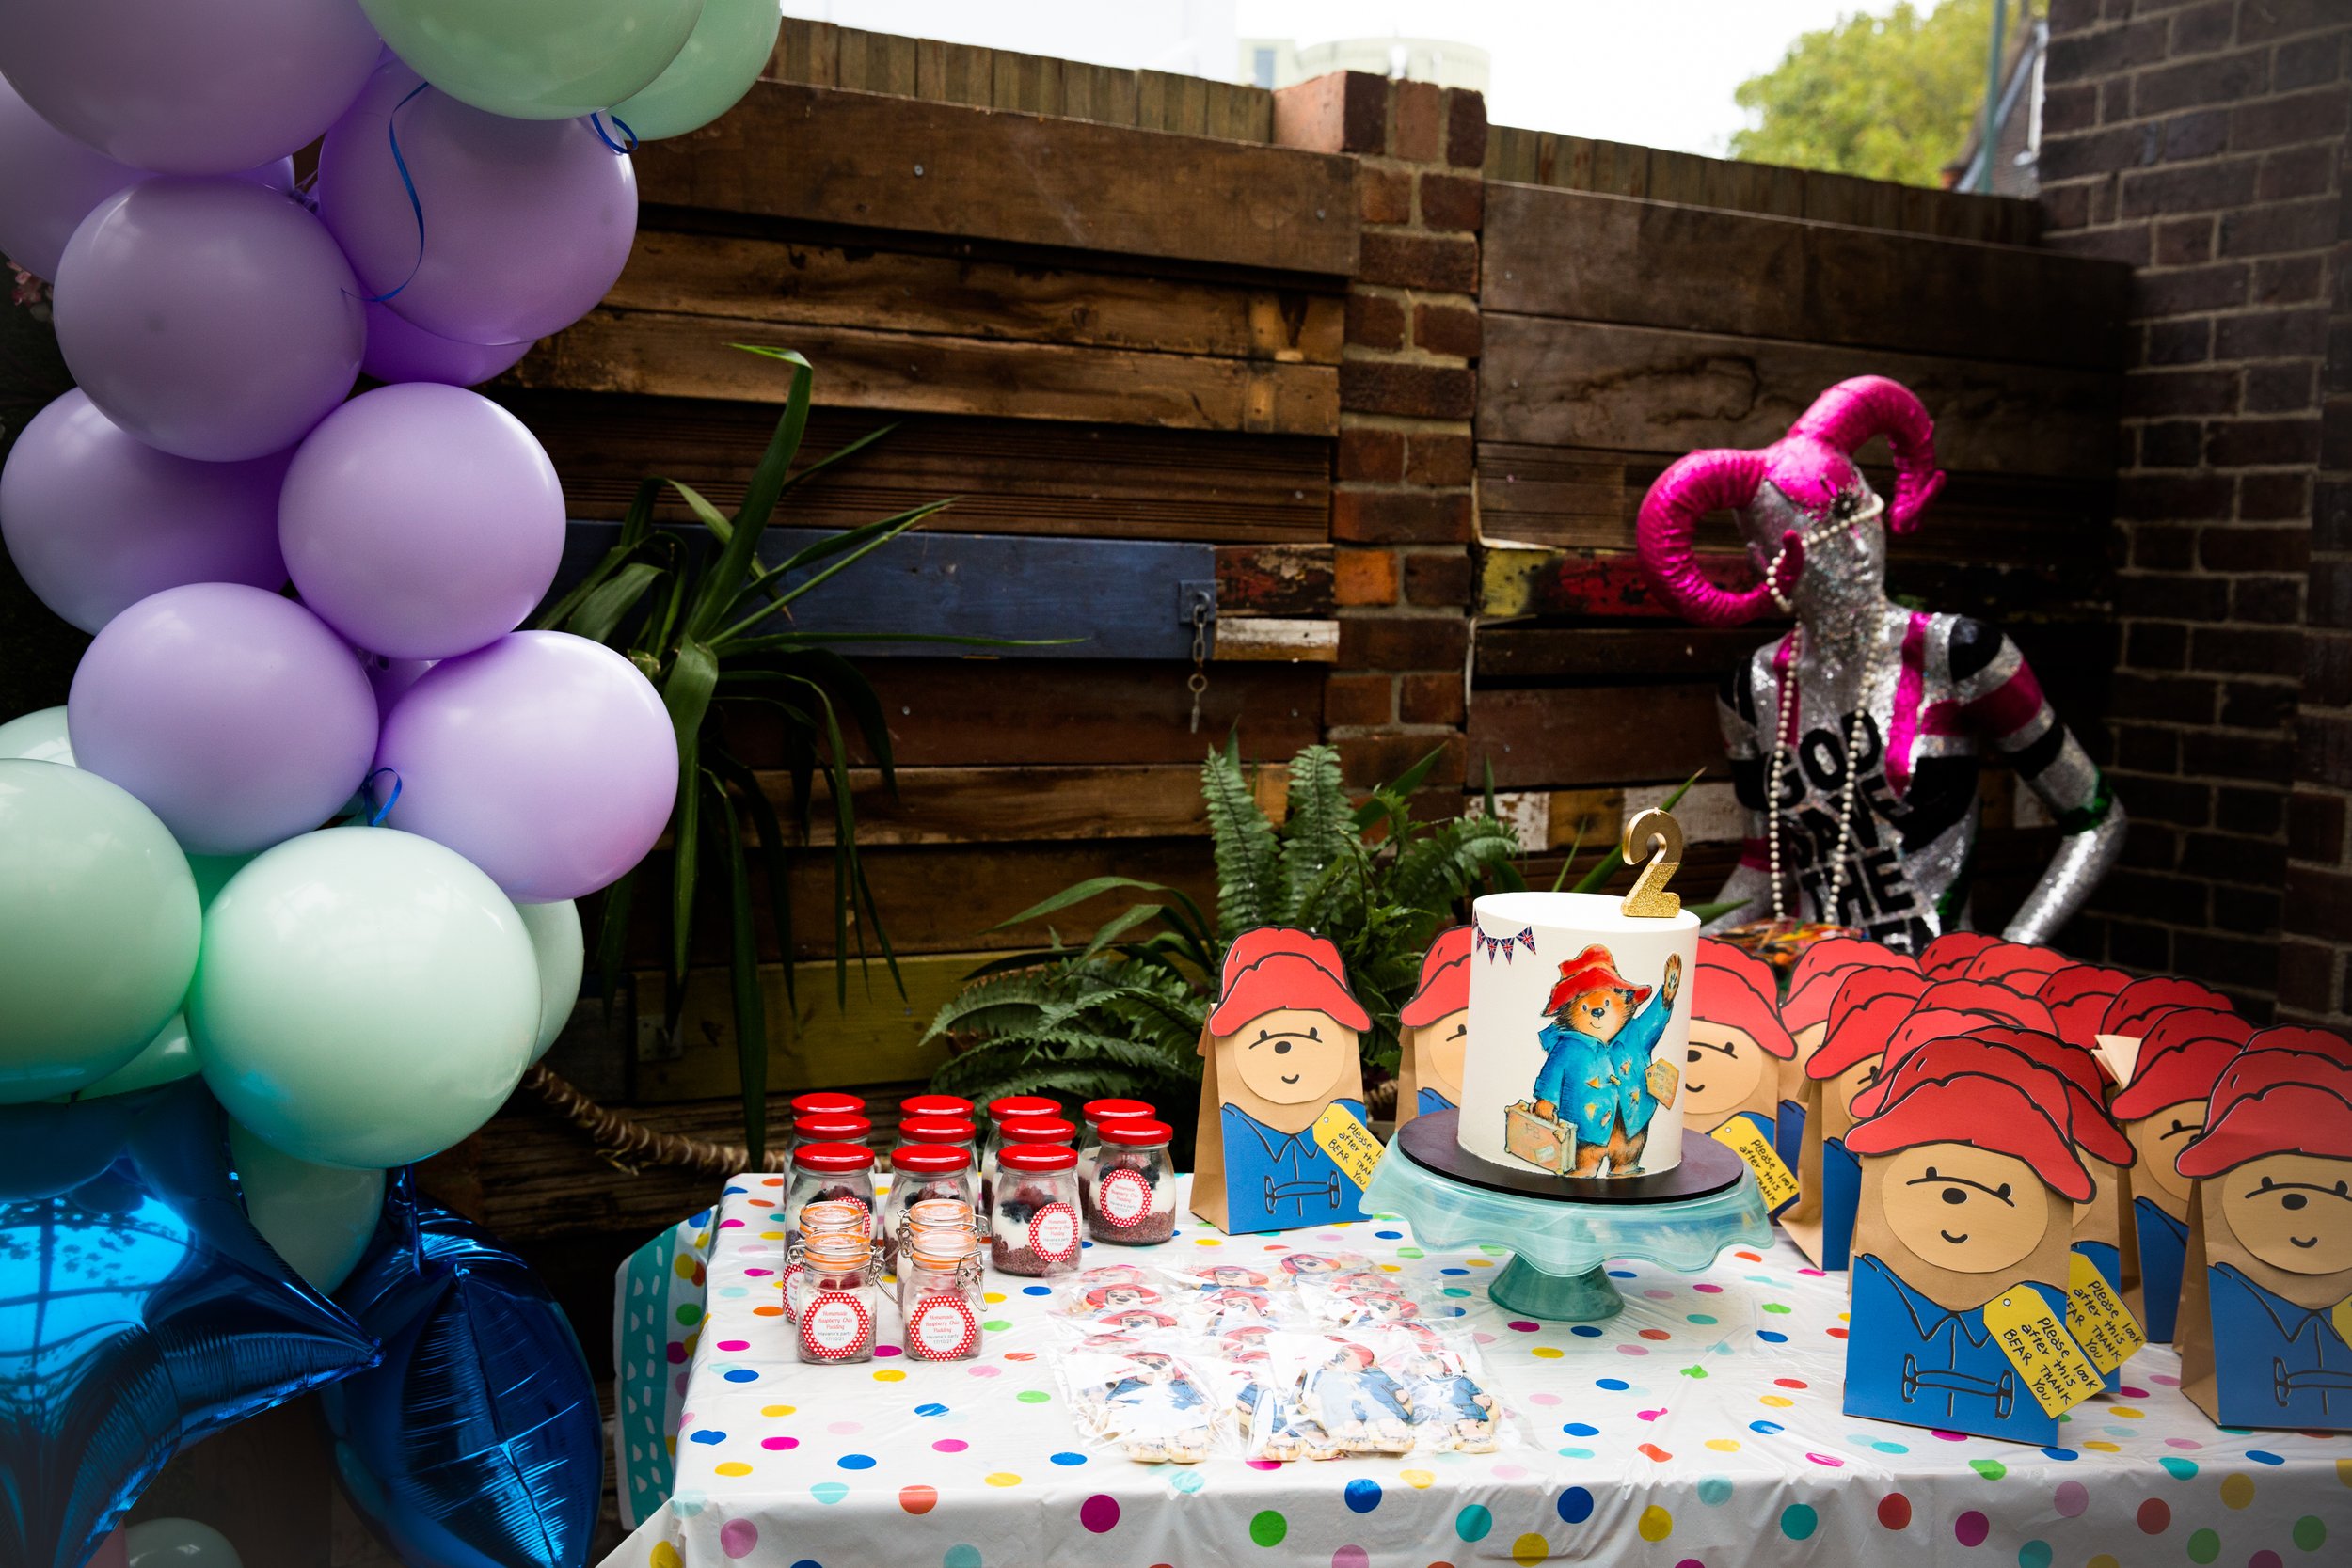 Children Party Photographer London and West London